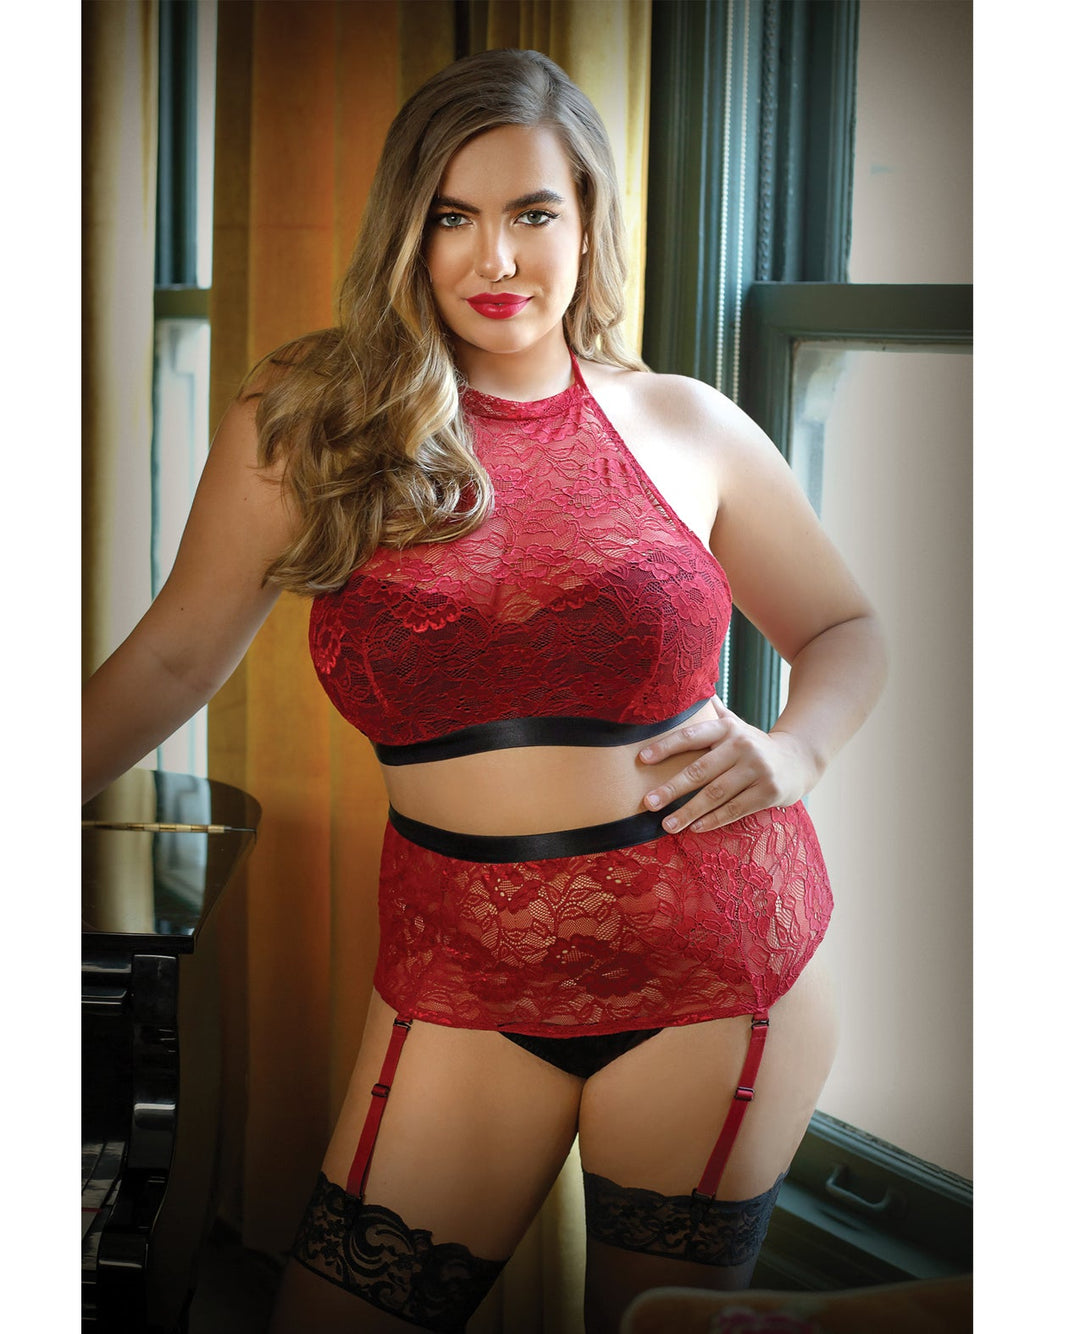 Fantasy Lingerie Plus Size Aria Lace Halter Top Bra & High Waist Panty Red